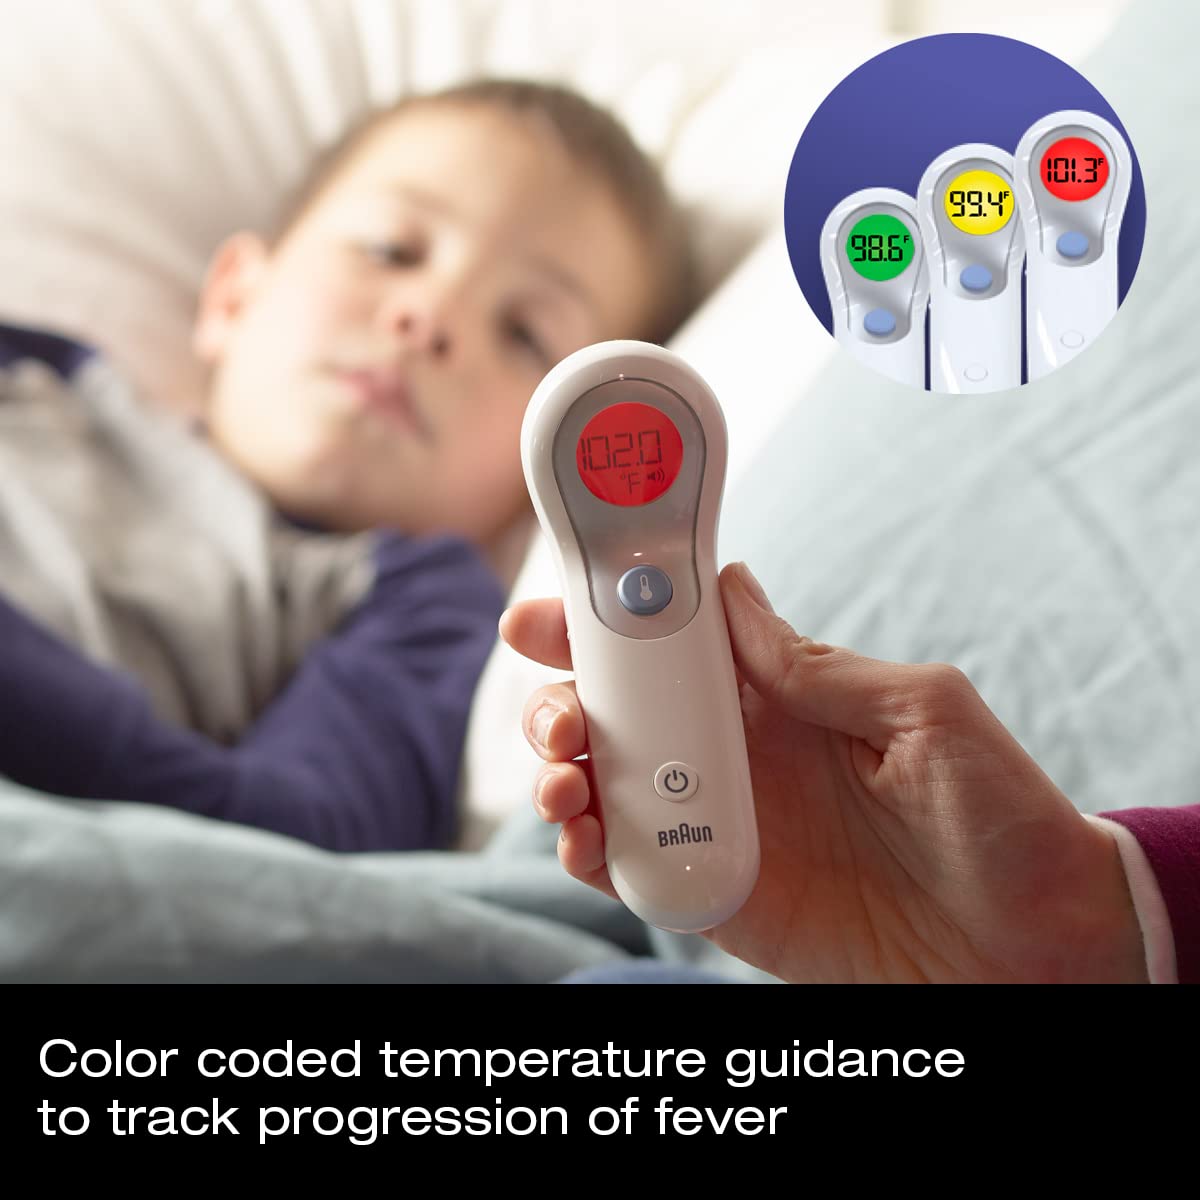 Braun No Touch and Forehead Thermometer - Touchless Thermometer for Adults, Babies, Toddlers and Kids – Fast, Reliable, and Accurate Results